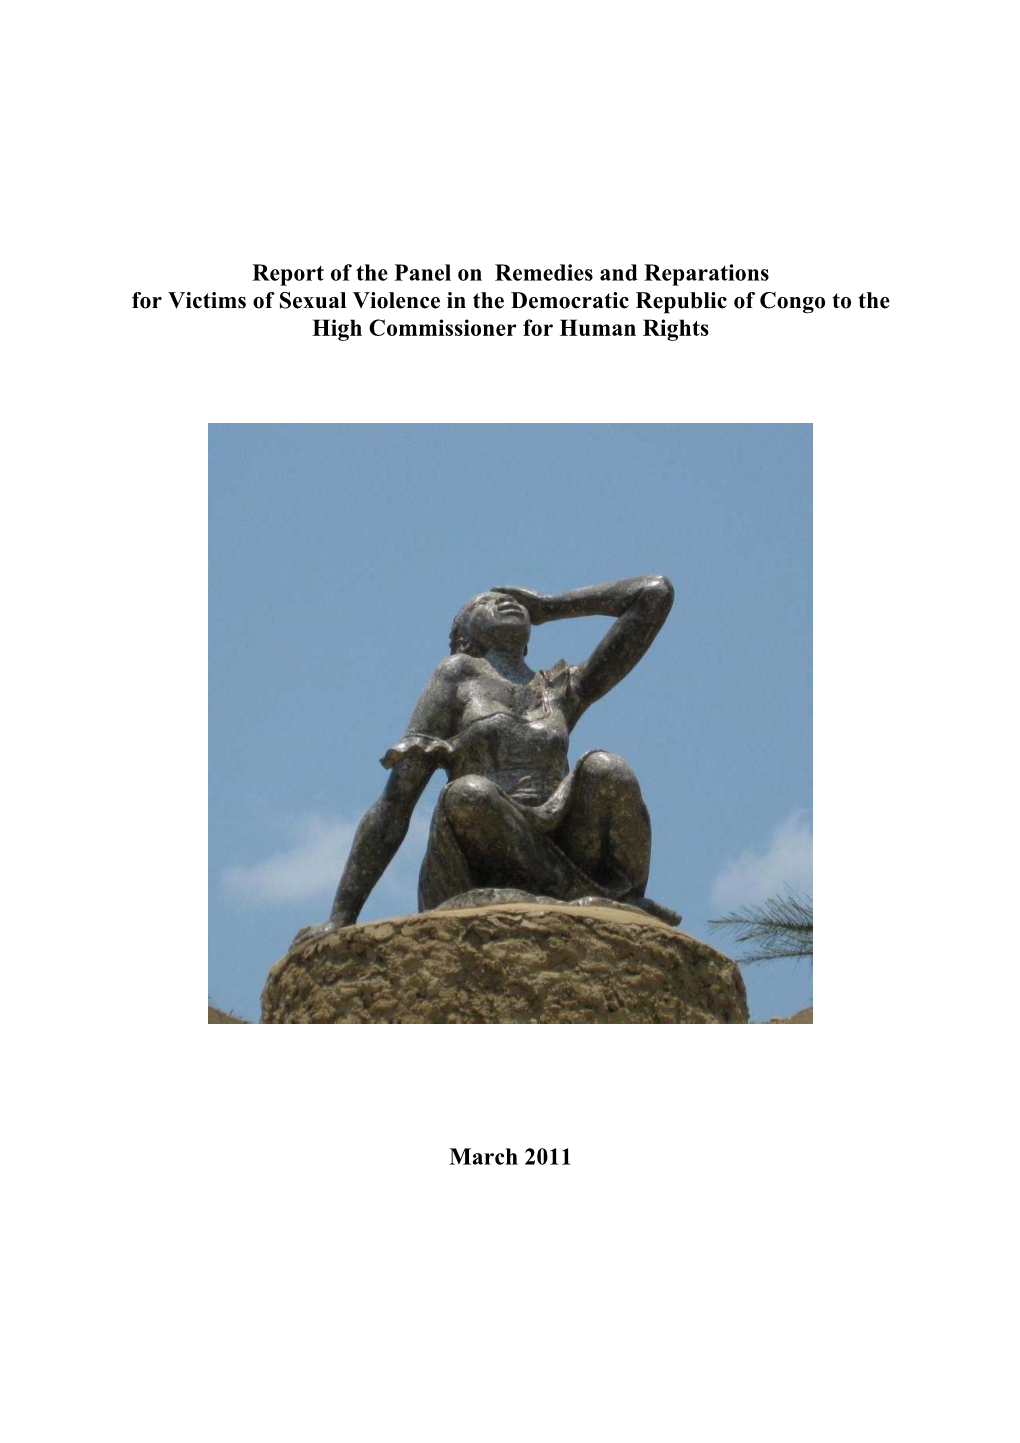 Report of the Panel on Remedies and Reparations for Victims of Sexual Violence in the Democratic Republic of Congo to the High Commissioner for Human Rights